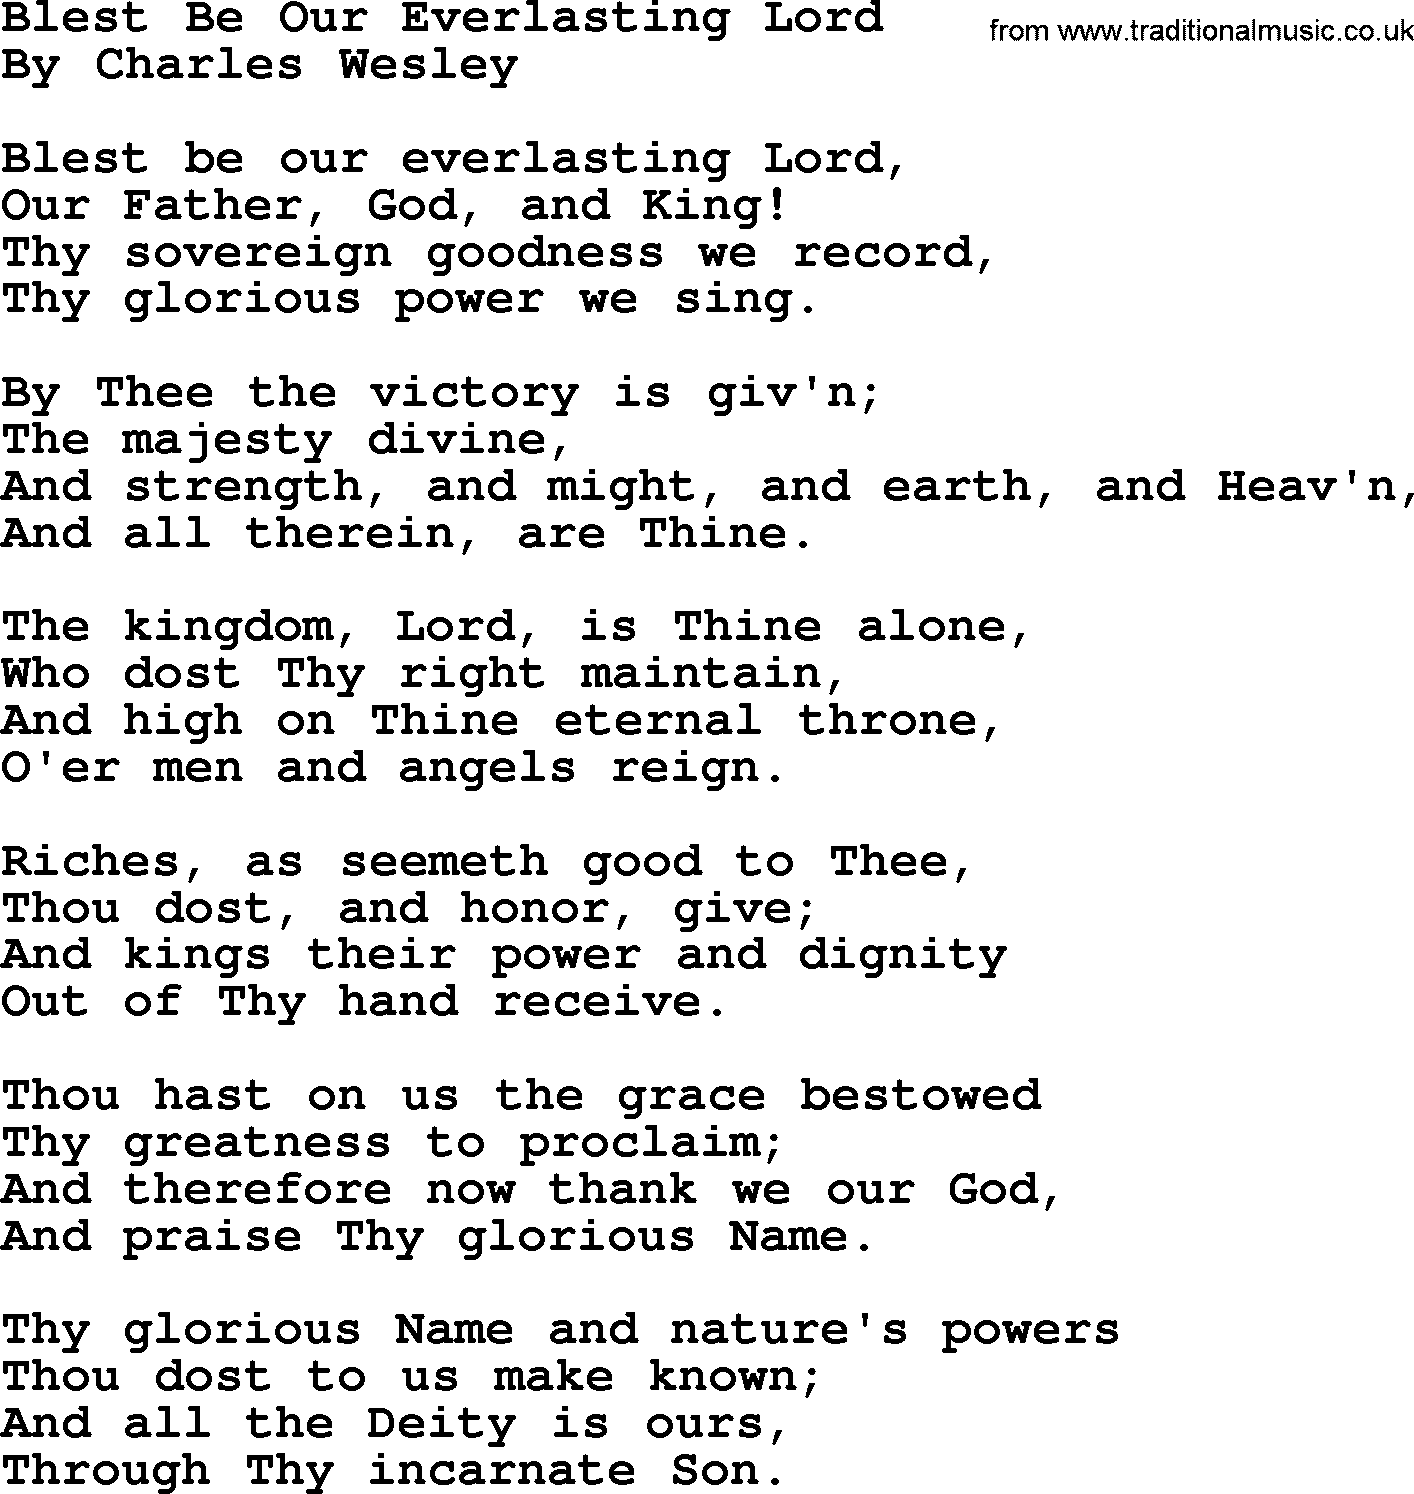 Charles Wesley hymn: Blest Be Our Everlasting Lord, lyrics